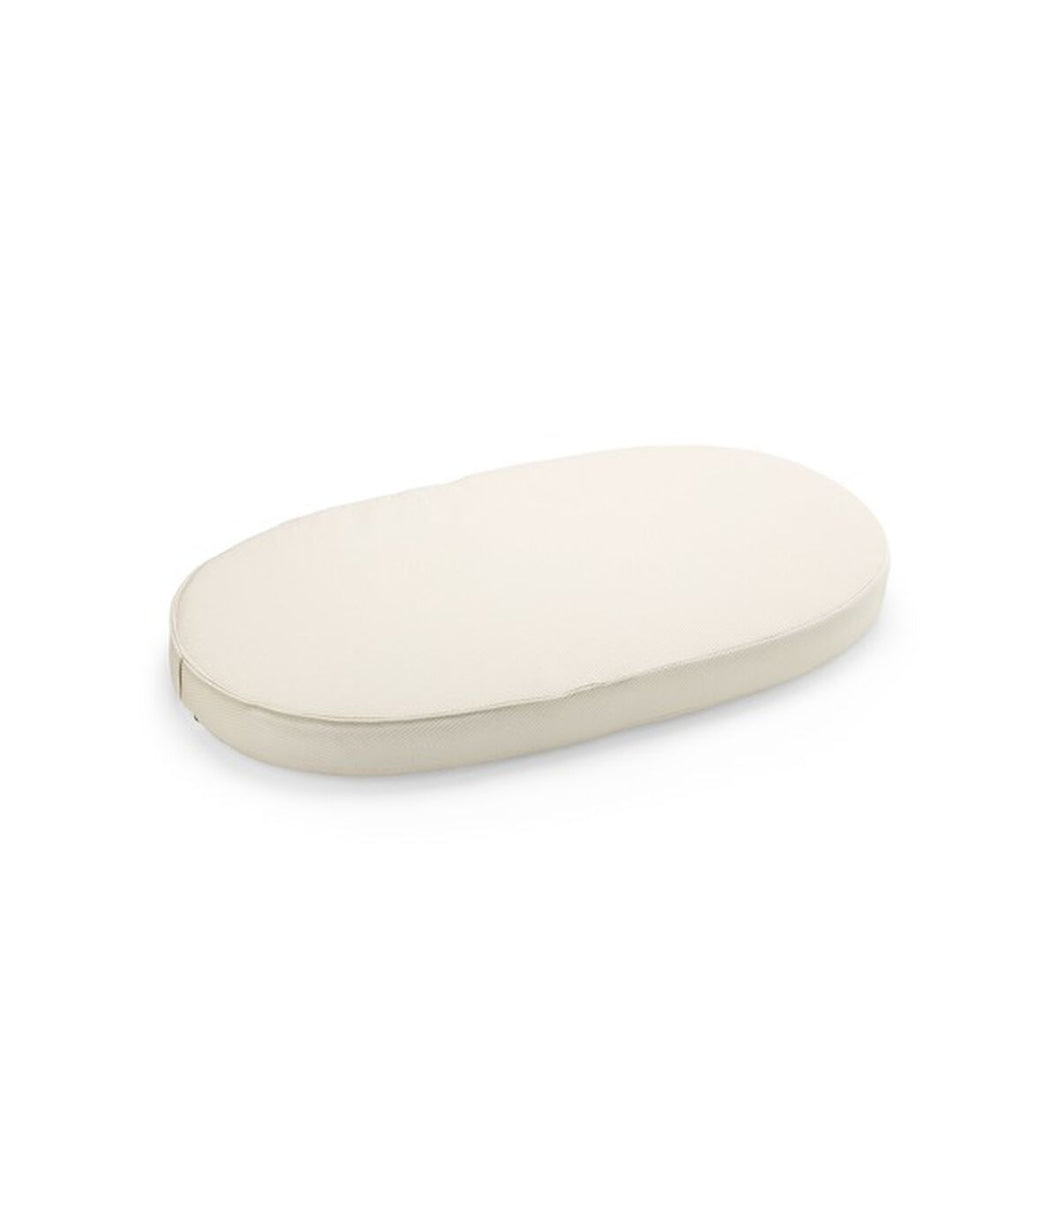 Stokke Sleepi Mattress With Organic Cover By Colgate